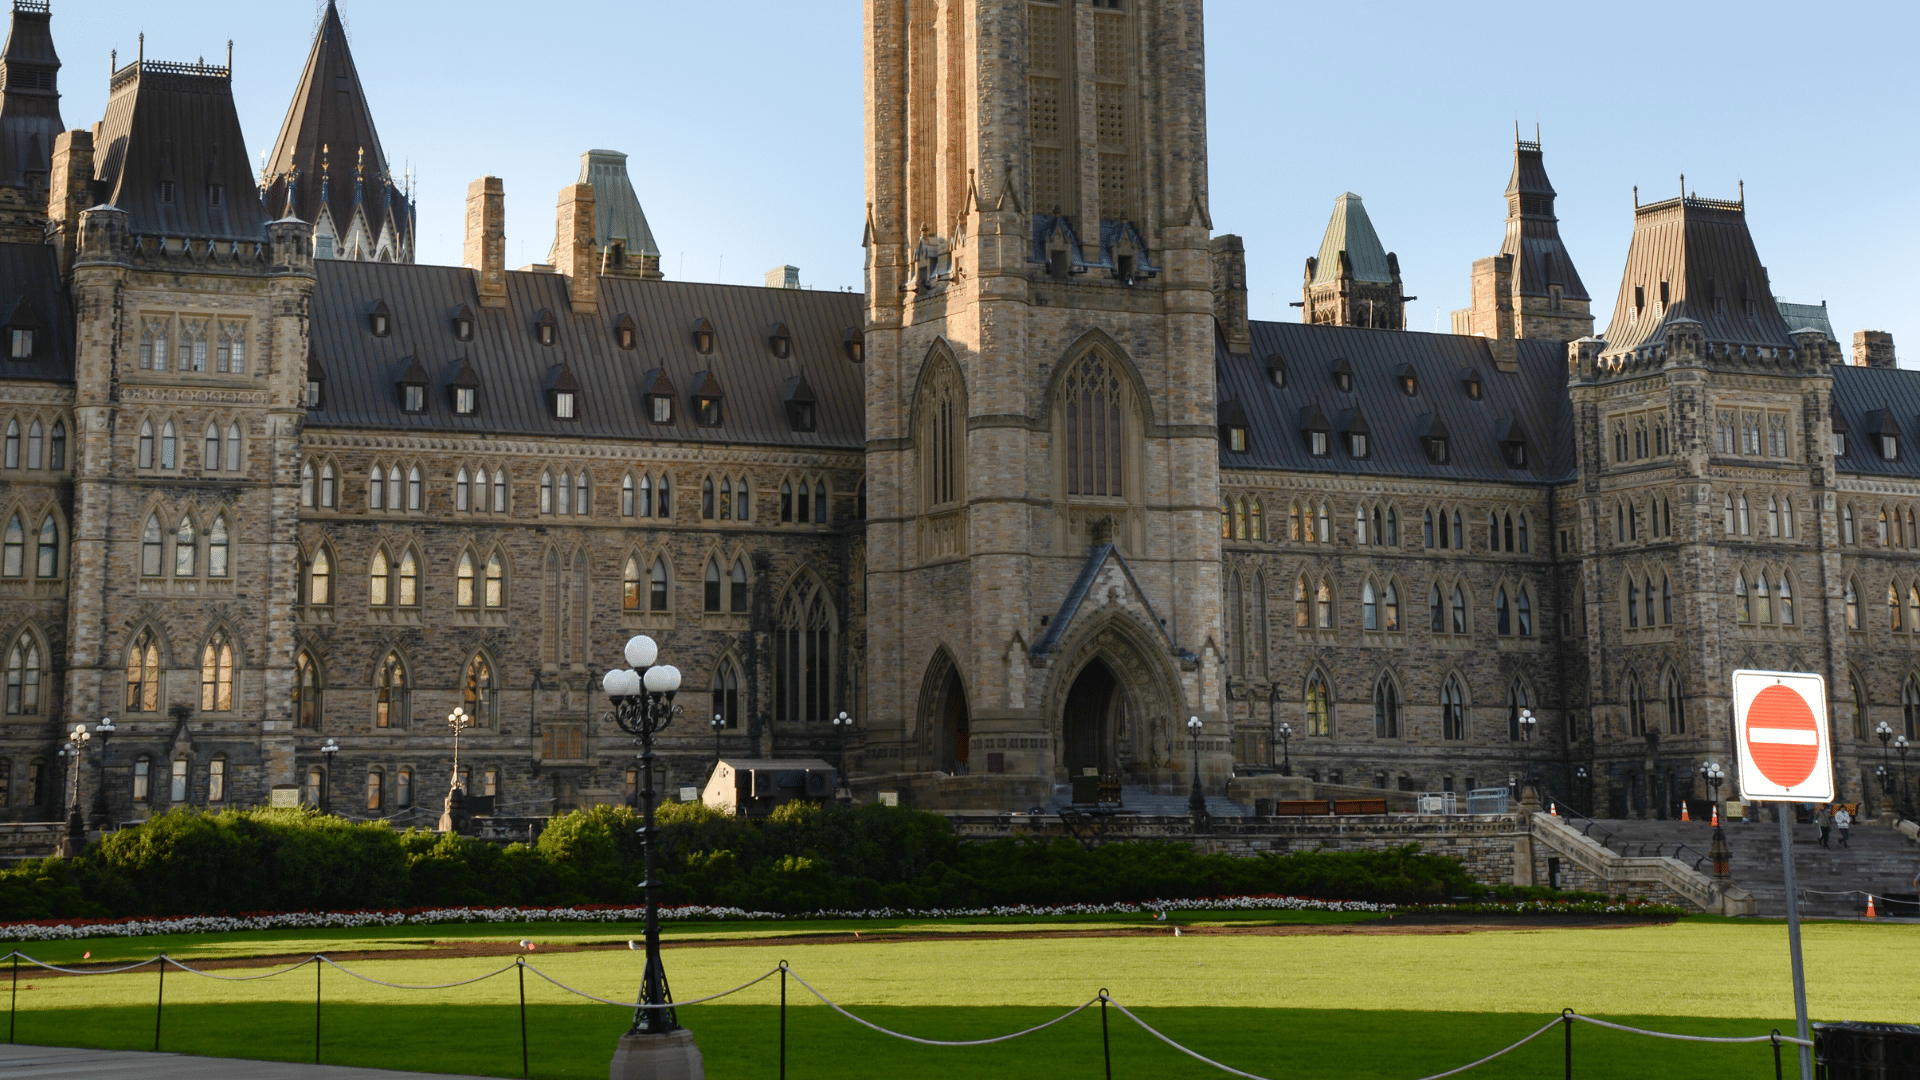 An image of the parliament building in Ottawa